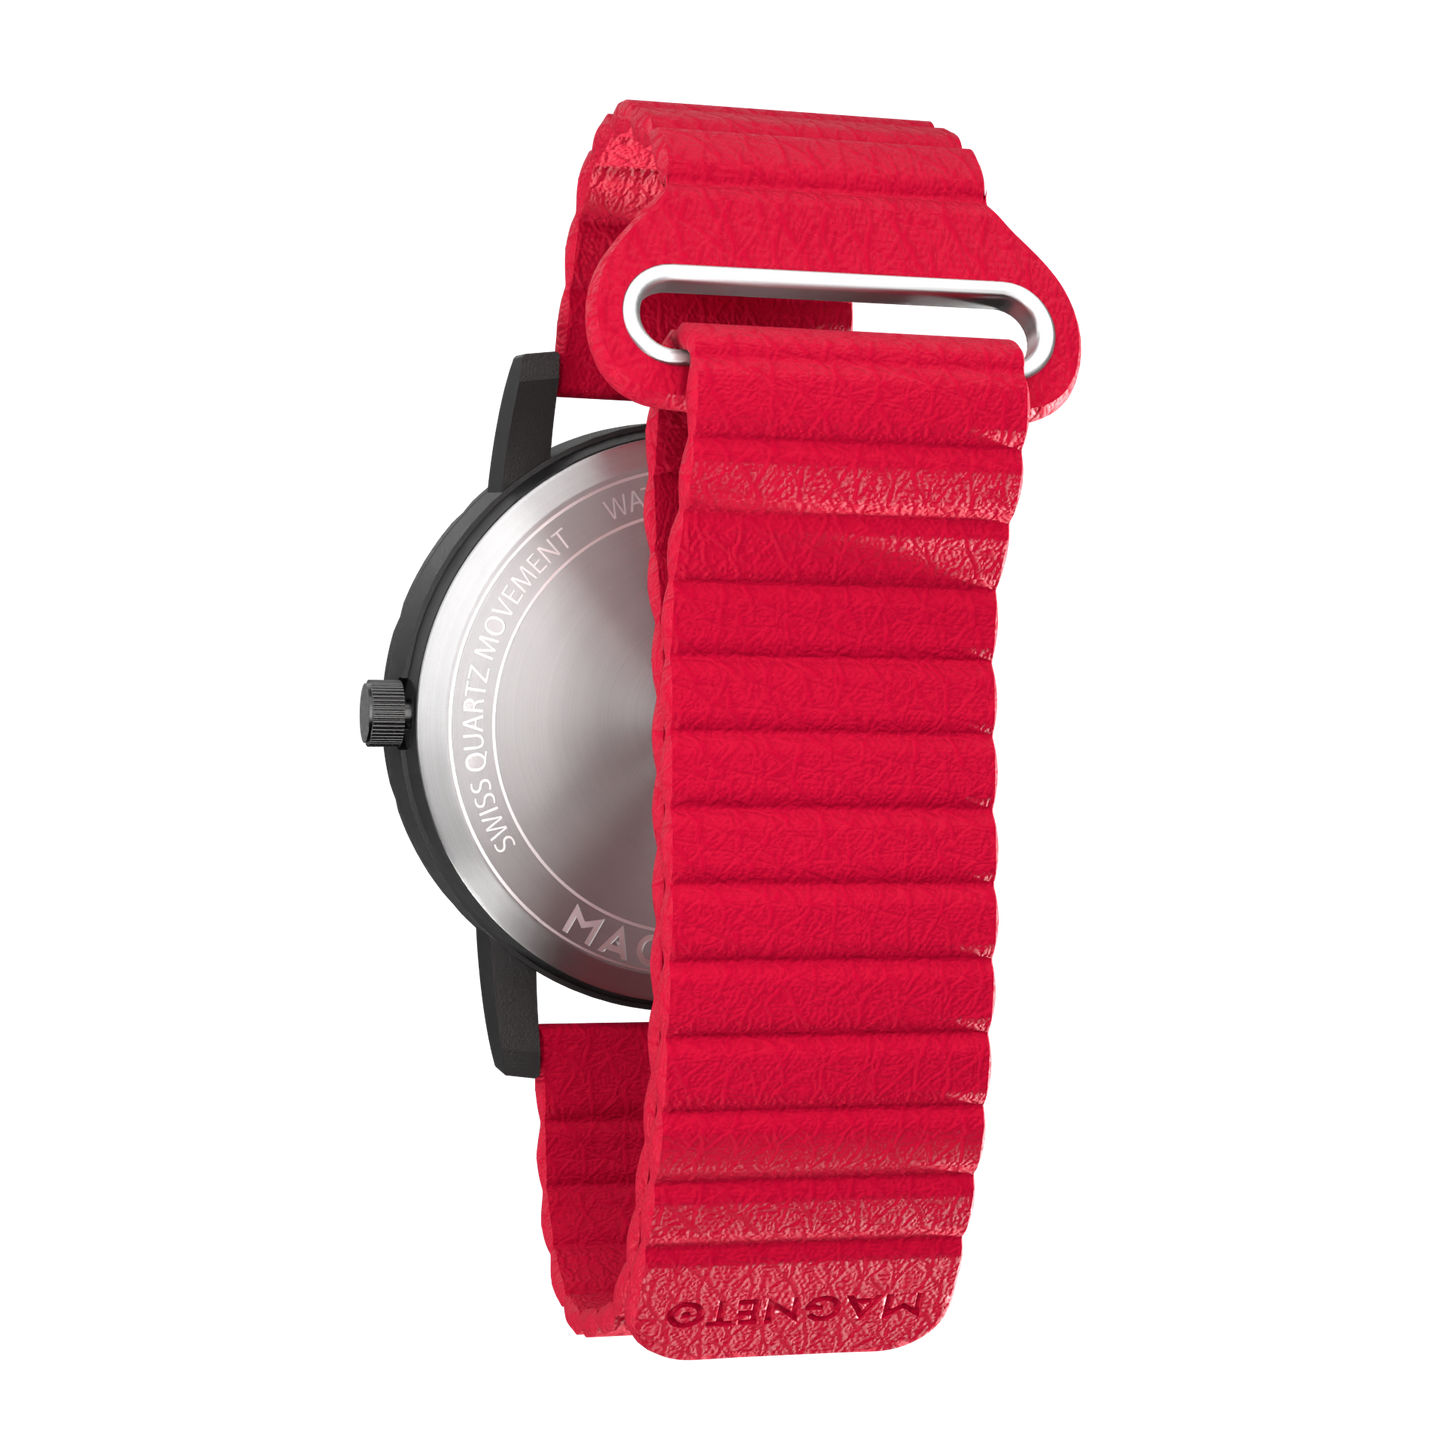 Jupiter Black synthetic leather magnetic red